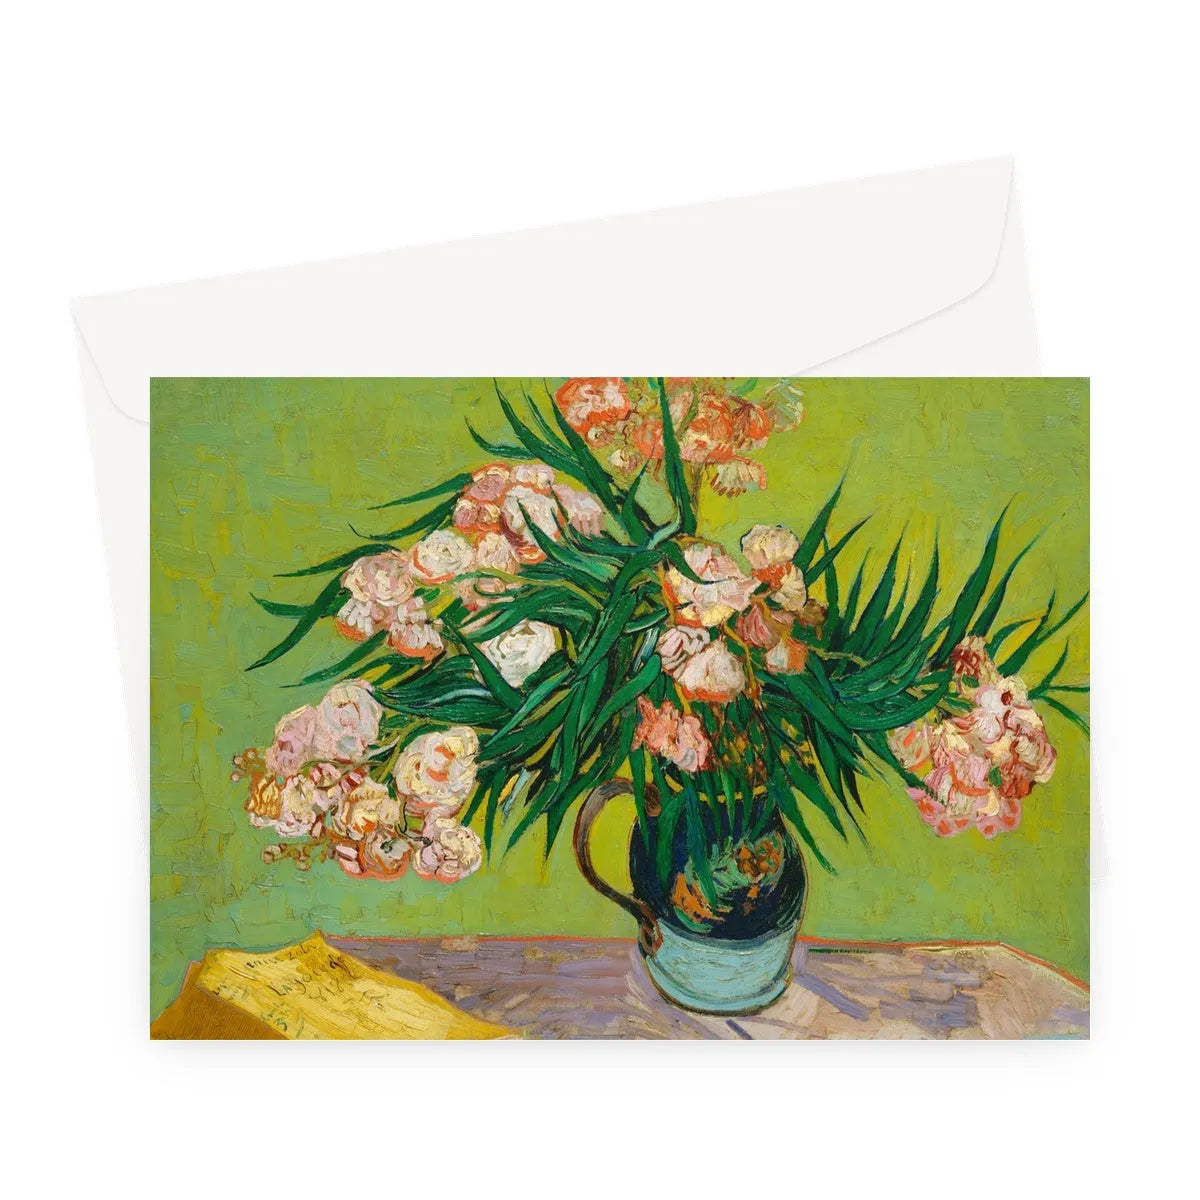 Oleanders By Vincent Van Gogh Greeting Card - A5 Landscape / 1 Card - Greeting & Note Cards - Aesthetic Art